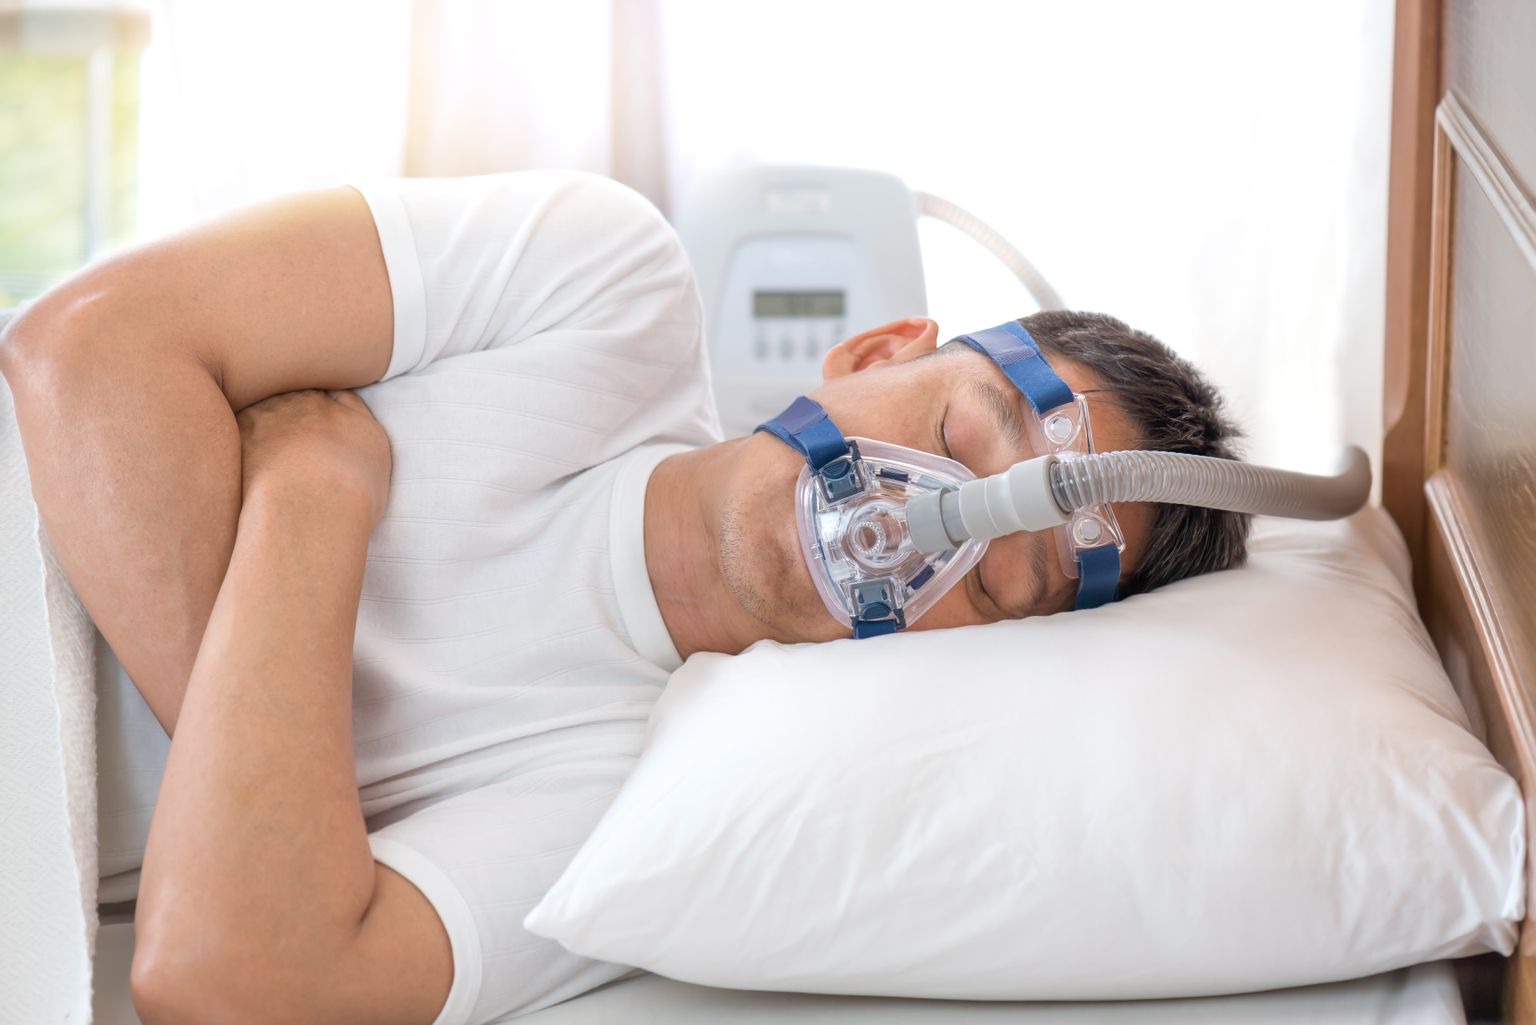 An elderly gentleman wears a breathing mask while lying on his side in bed trying to fall asleep.